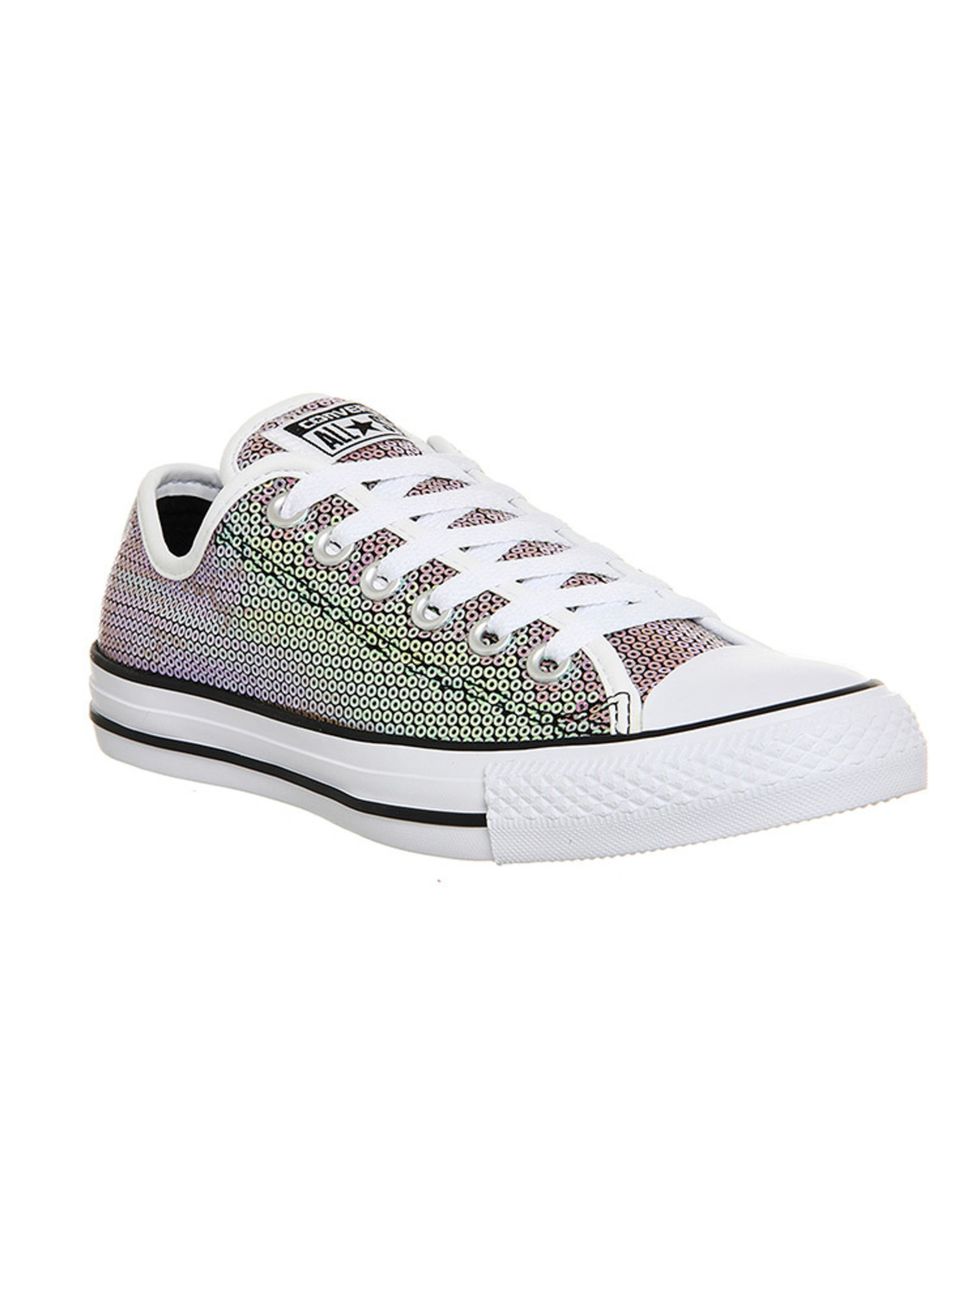 <p>Perfect for running around in, who said plimsoles have to be basic? </p>

<p>Trainers, £54.99, Converse at <a href="http://www.office.co.uk/view/product/office_catalog/5,21/2413193890" target="_blank">Office</a></p>